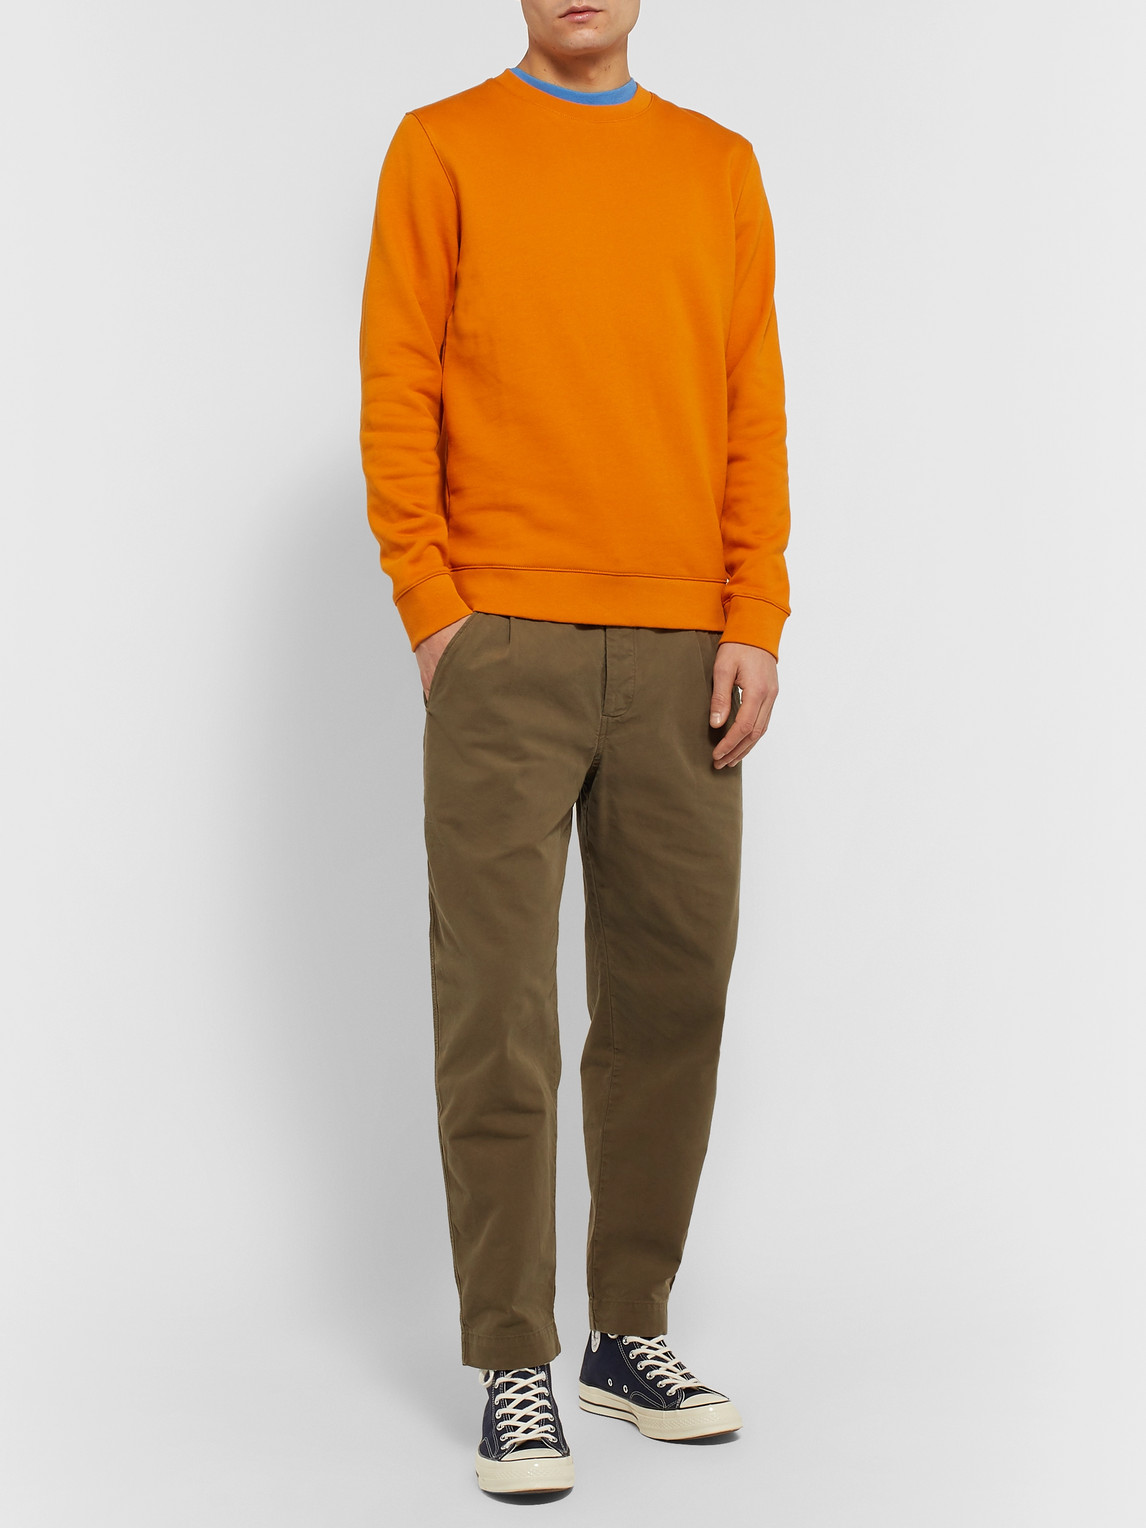 NORSE PROJECTS VAGN LOOPBACK COTTON-JERSEY SWEATSHIRT